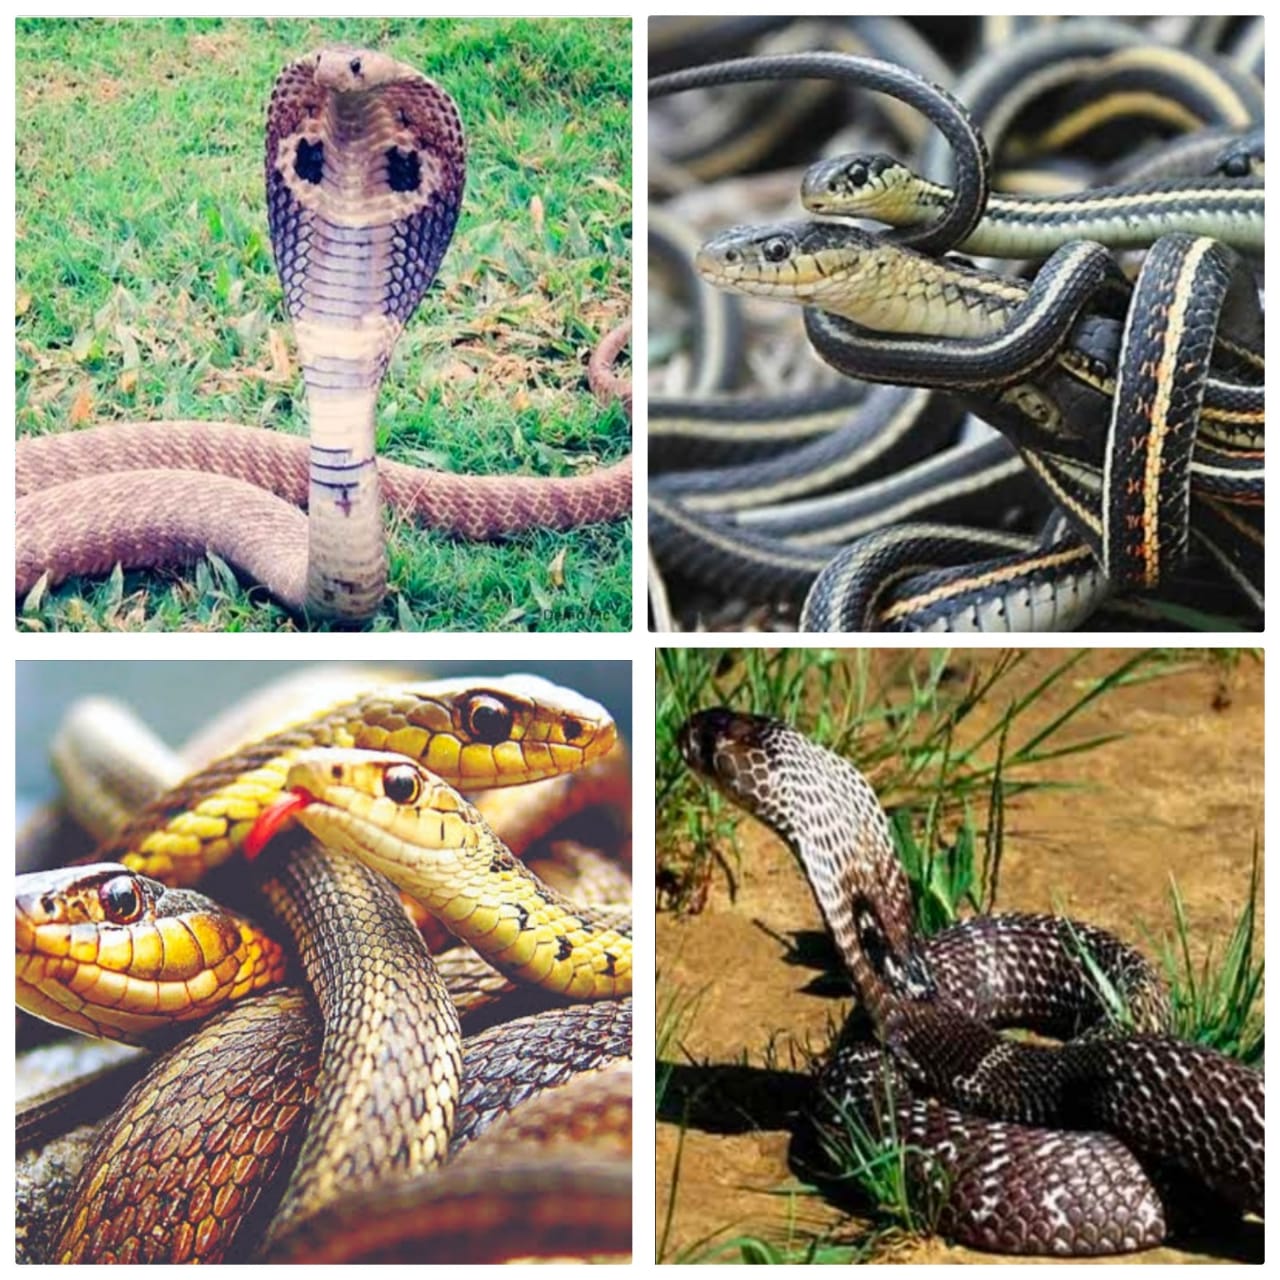 the-snakes-are-leaving-their-house-due-to-the-heat